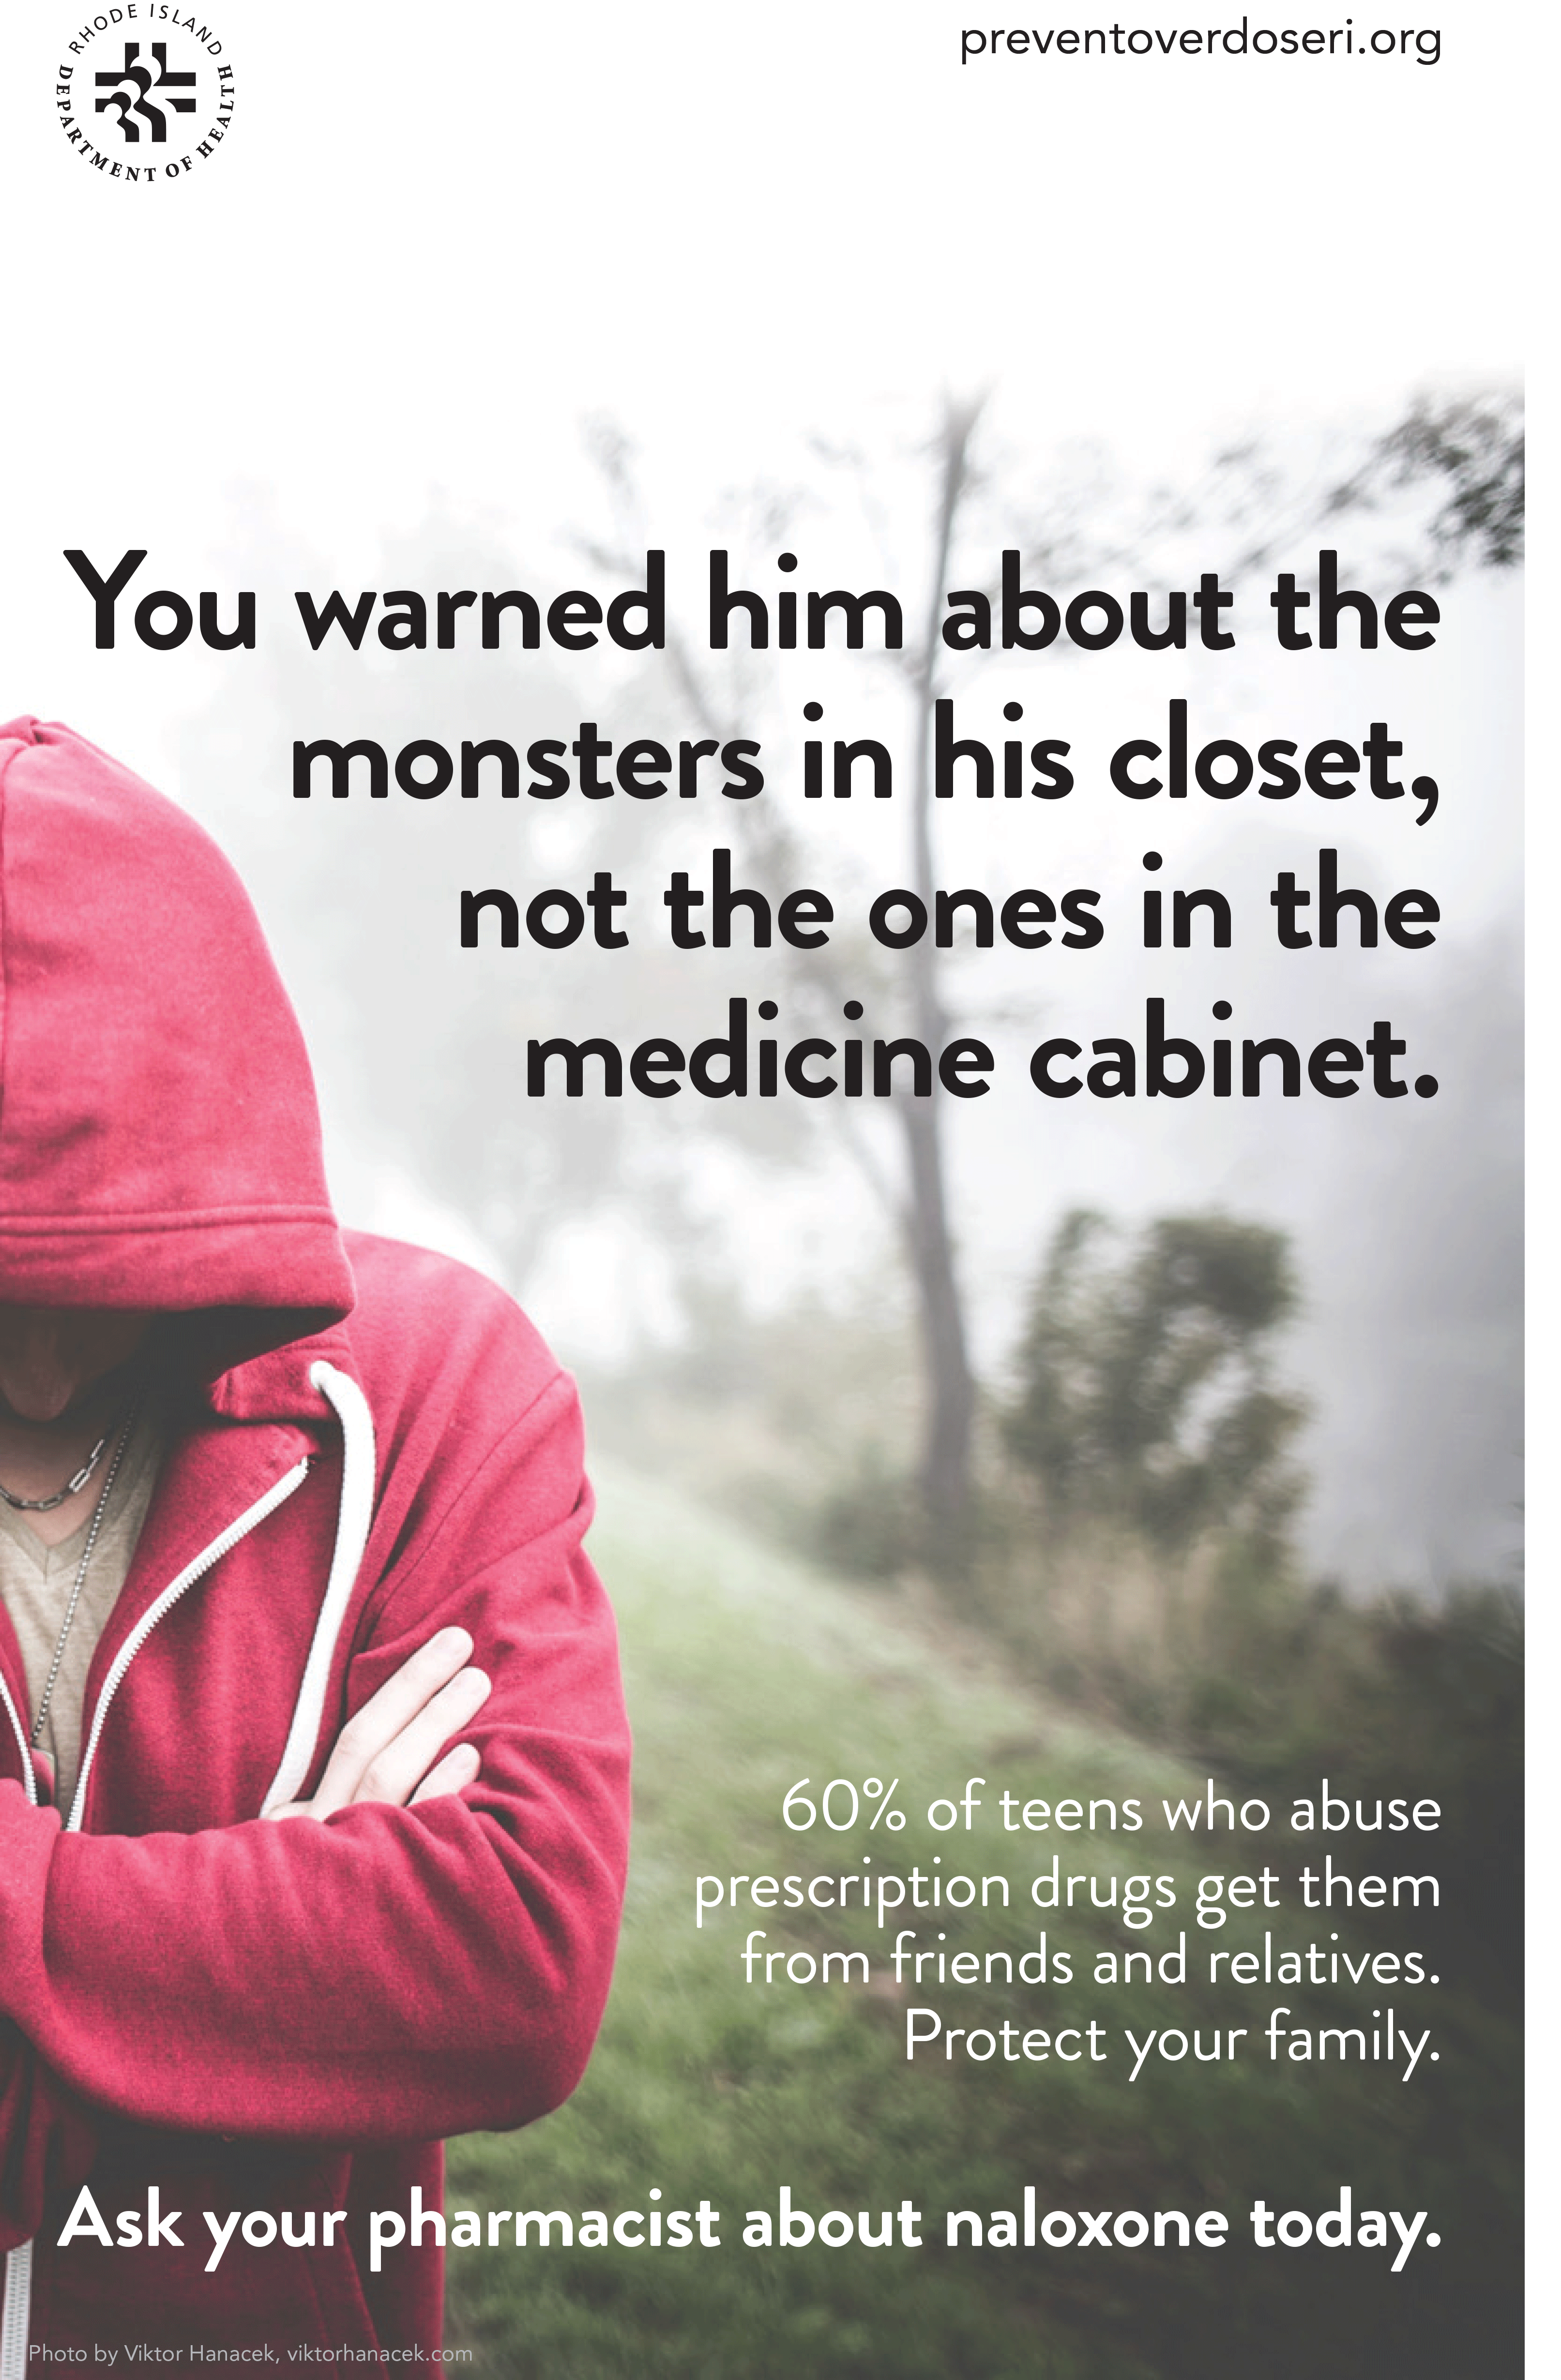 You warned him about the monsters in the closet, not the ones in the medicine cabinet.